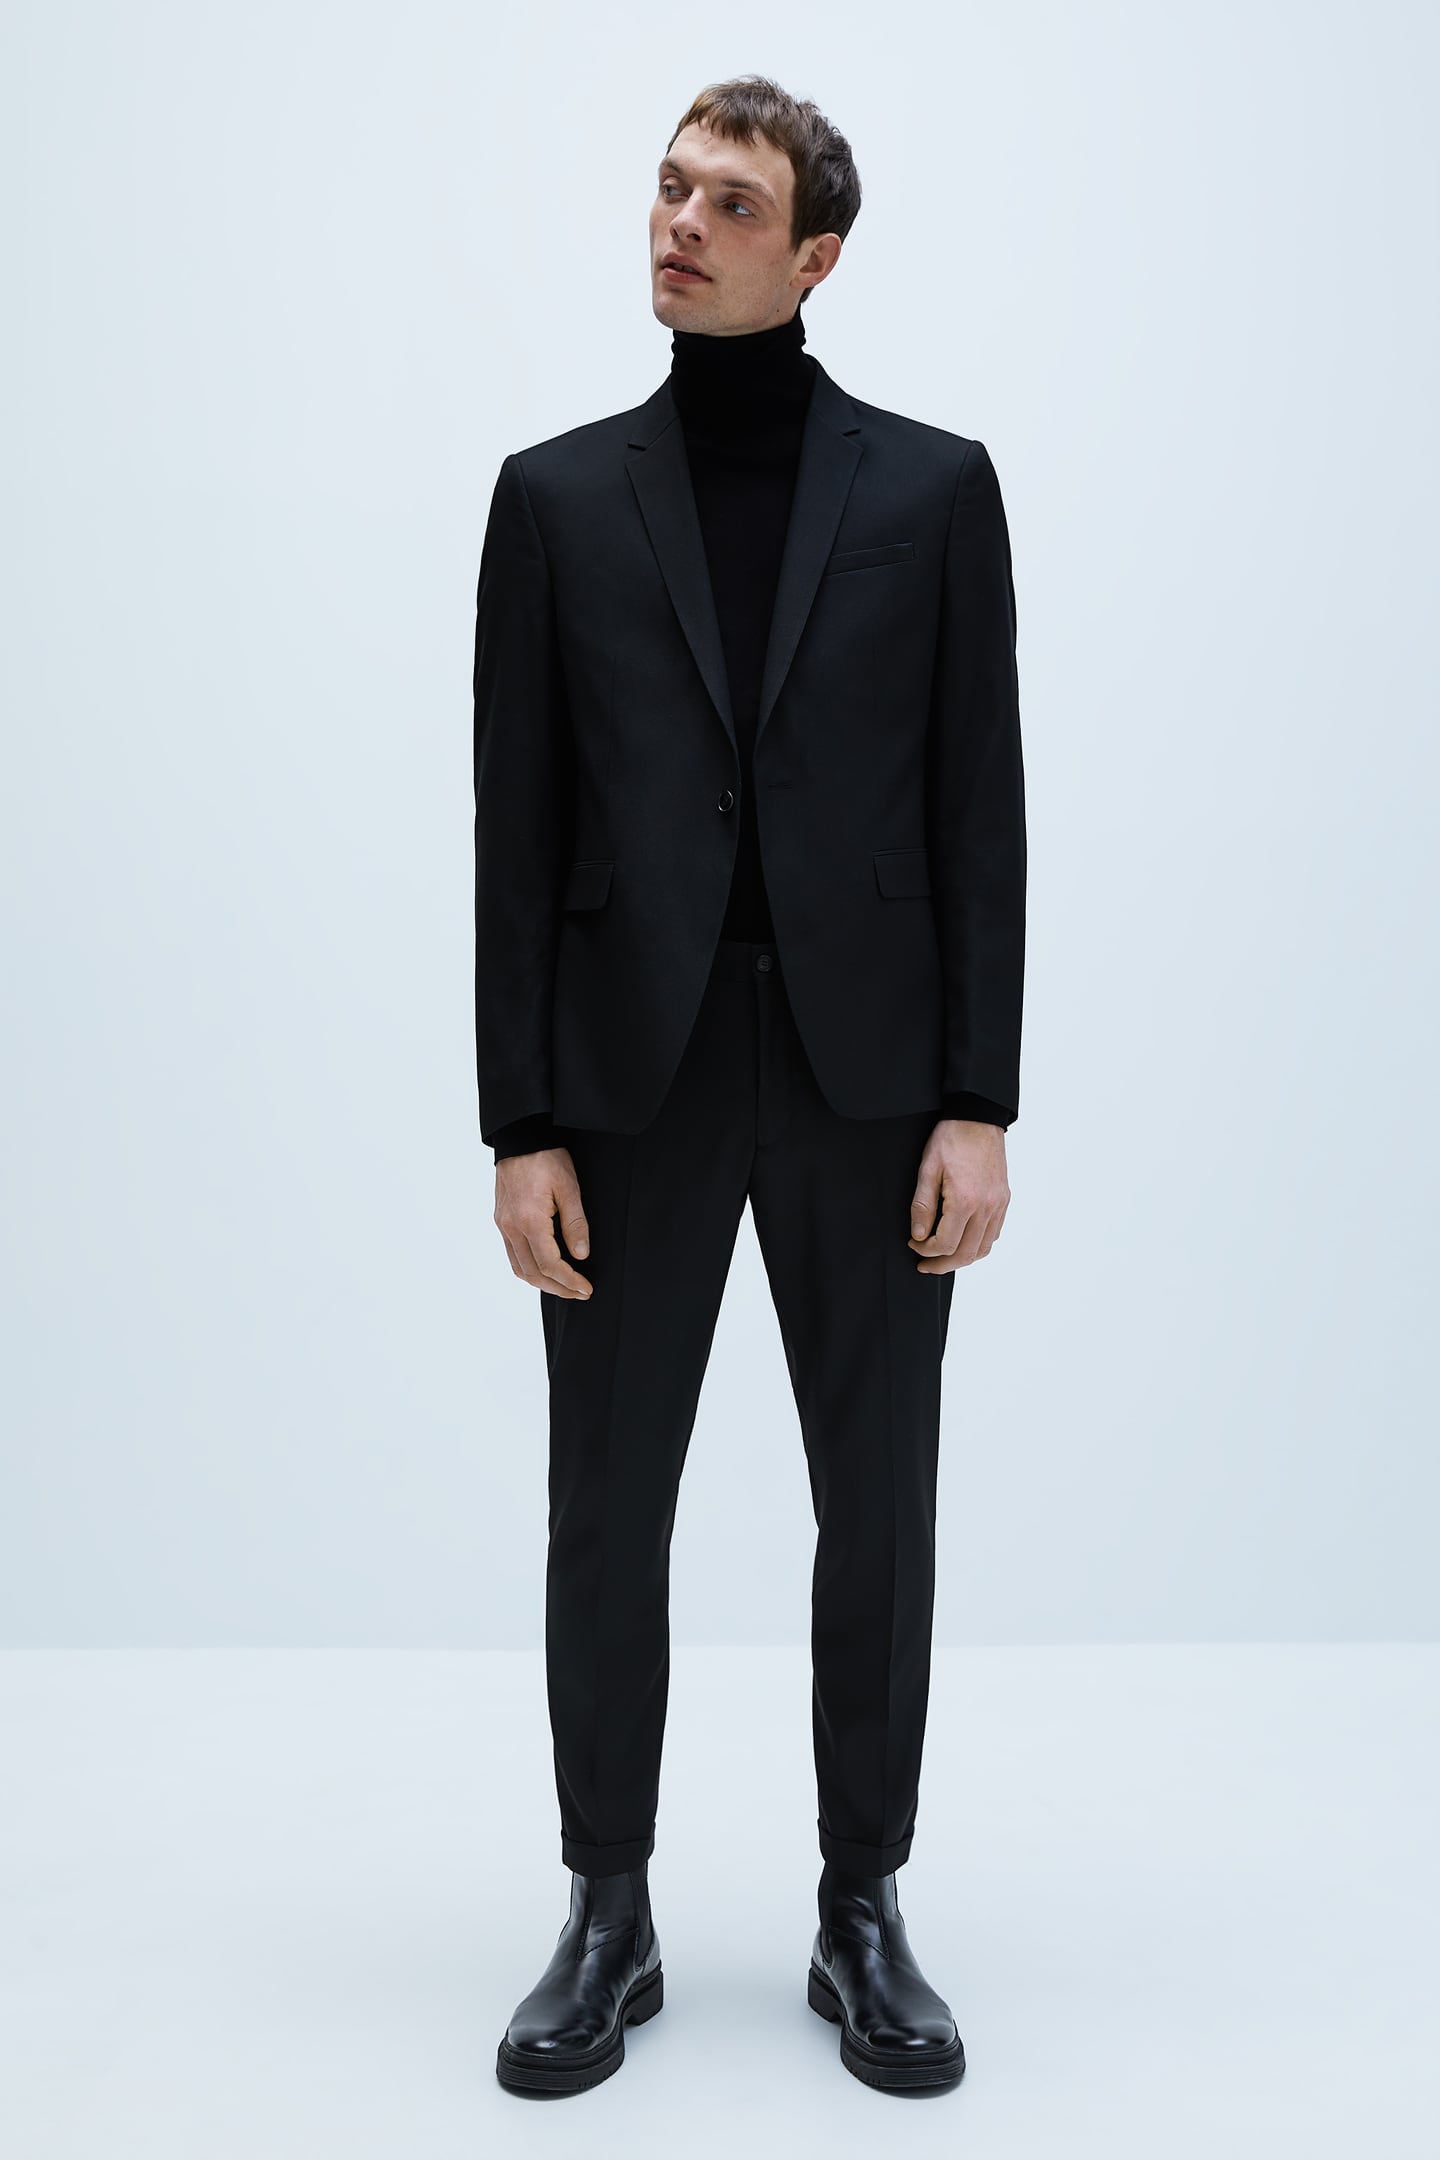 Black suit styled with a roll neck jumper | Vanityforbes